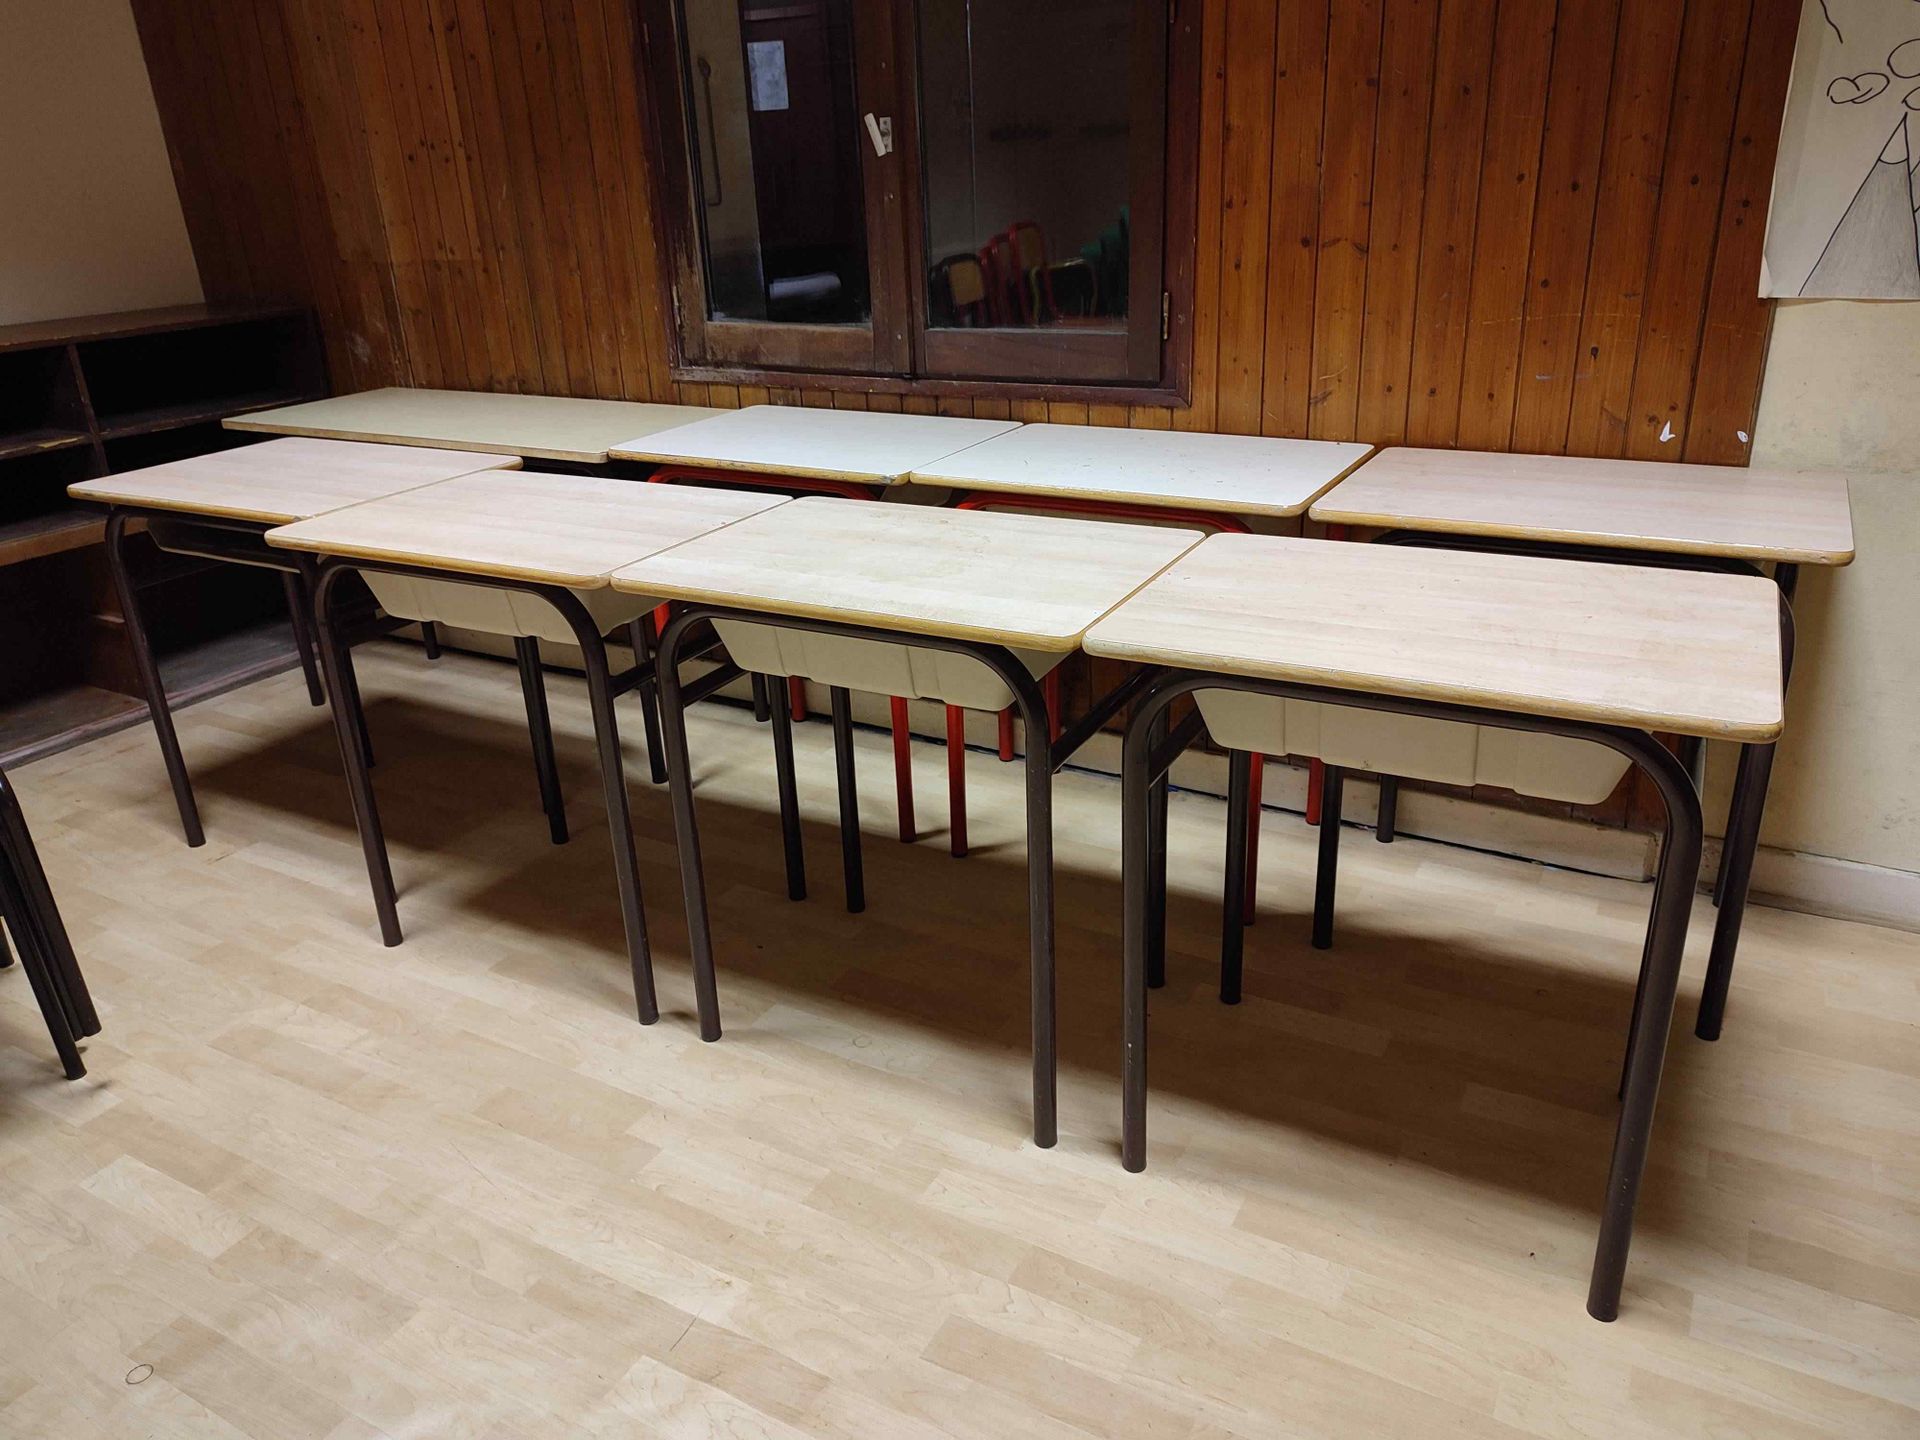 Null Classroom furniture set in used condition including:
- 17 chairs (various m&hellip;